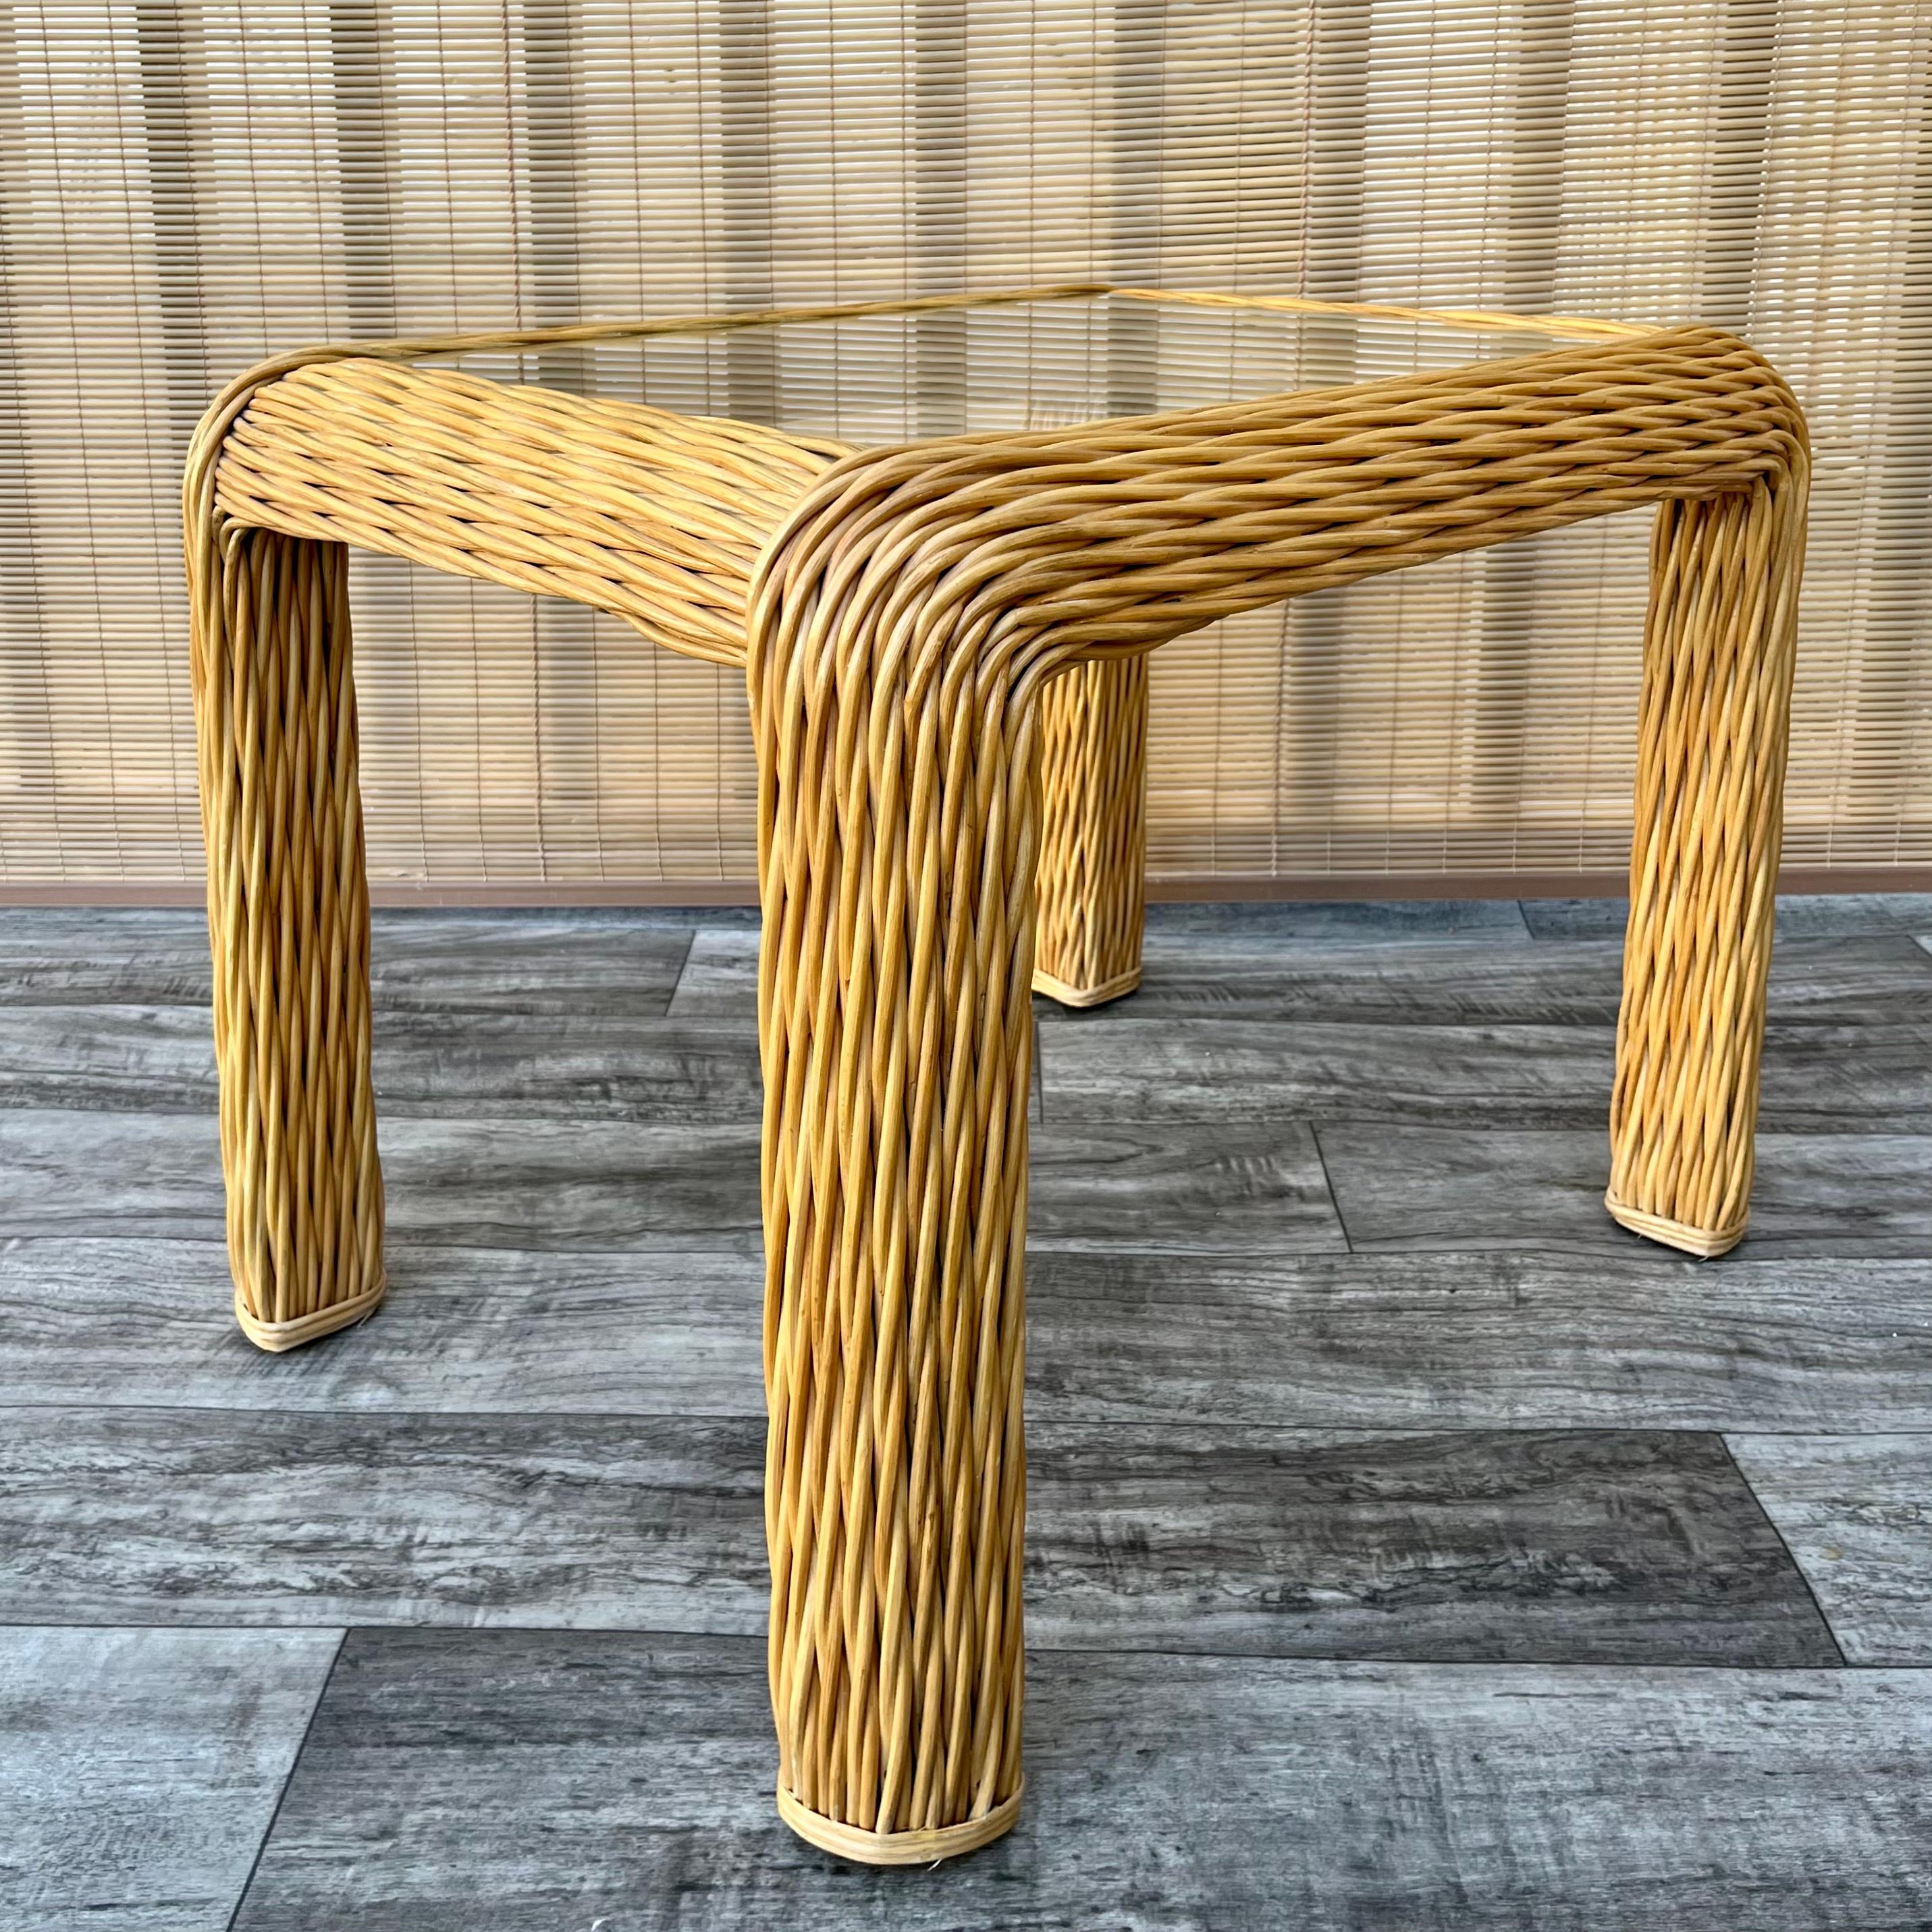 Vintage Coastal Style Braided Pencil Reed Rattan Side Table in the McGuire Style. circa 1980s.
Features sophisticated curves, an elaborated braided pencil reed construction and an a glass top.
In excellent original condition with very minor sings